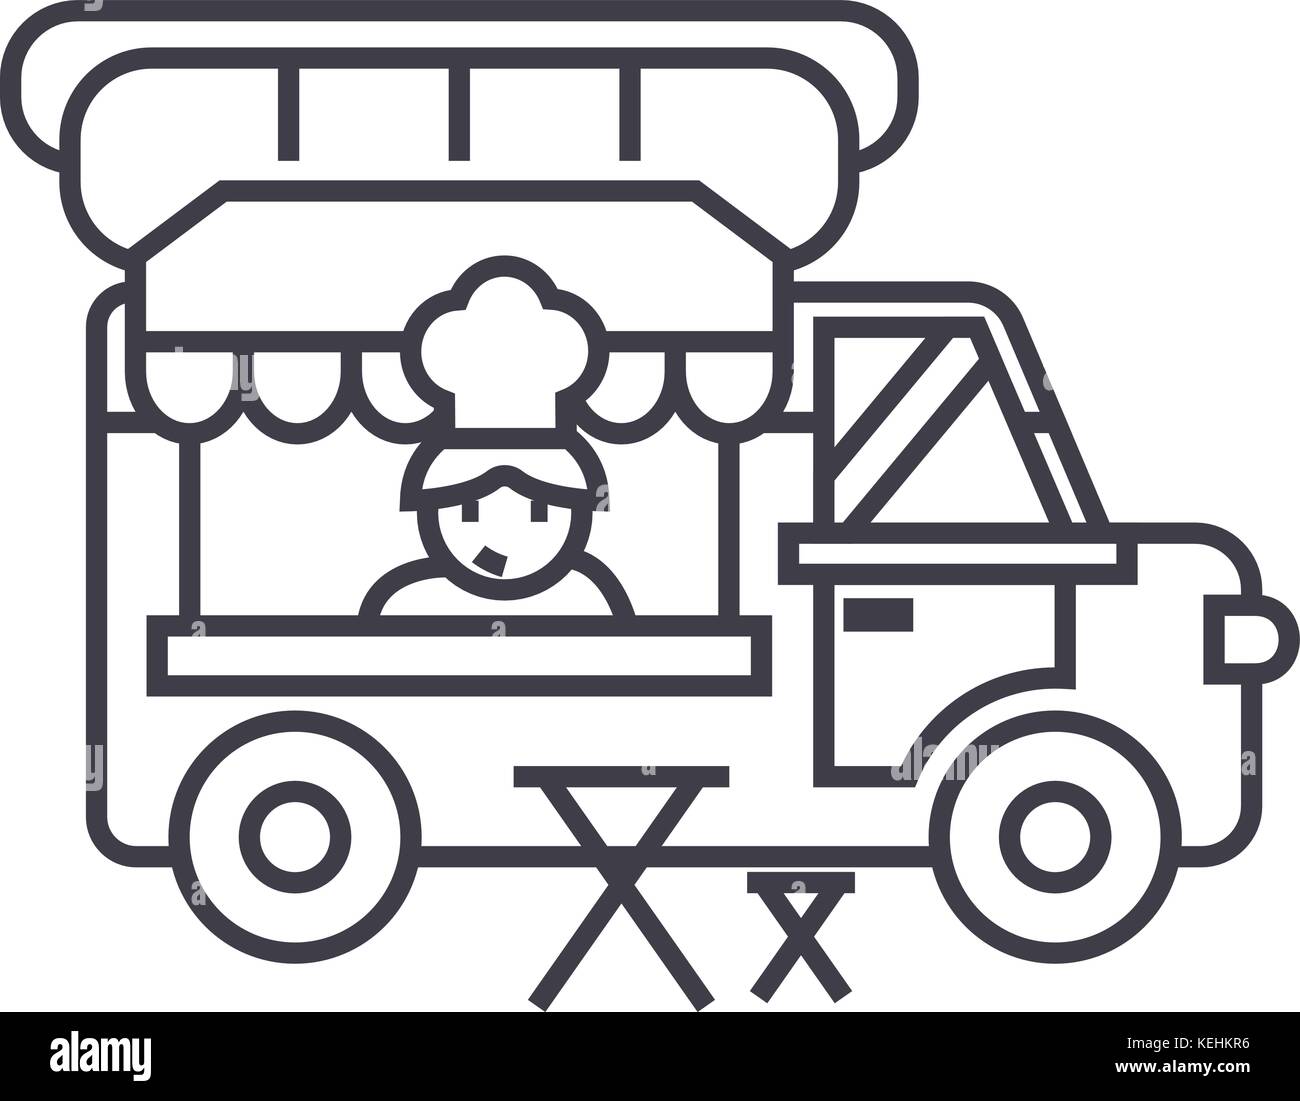 food truck,street mobile kitchen vector line icon, sign, illustration on background, editable strokes Stock Vector